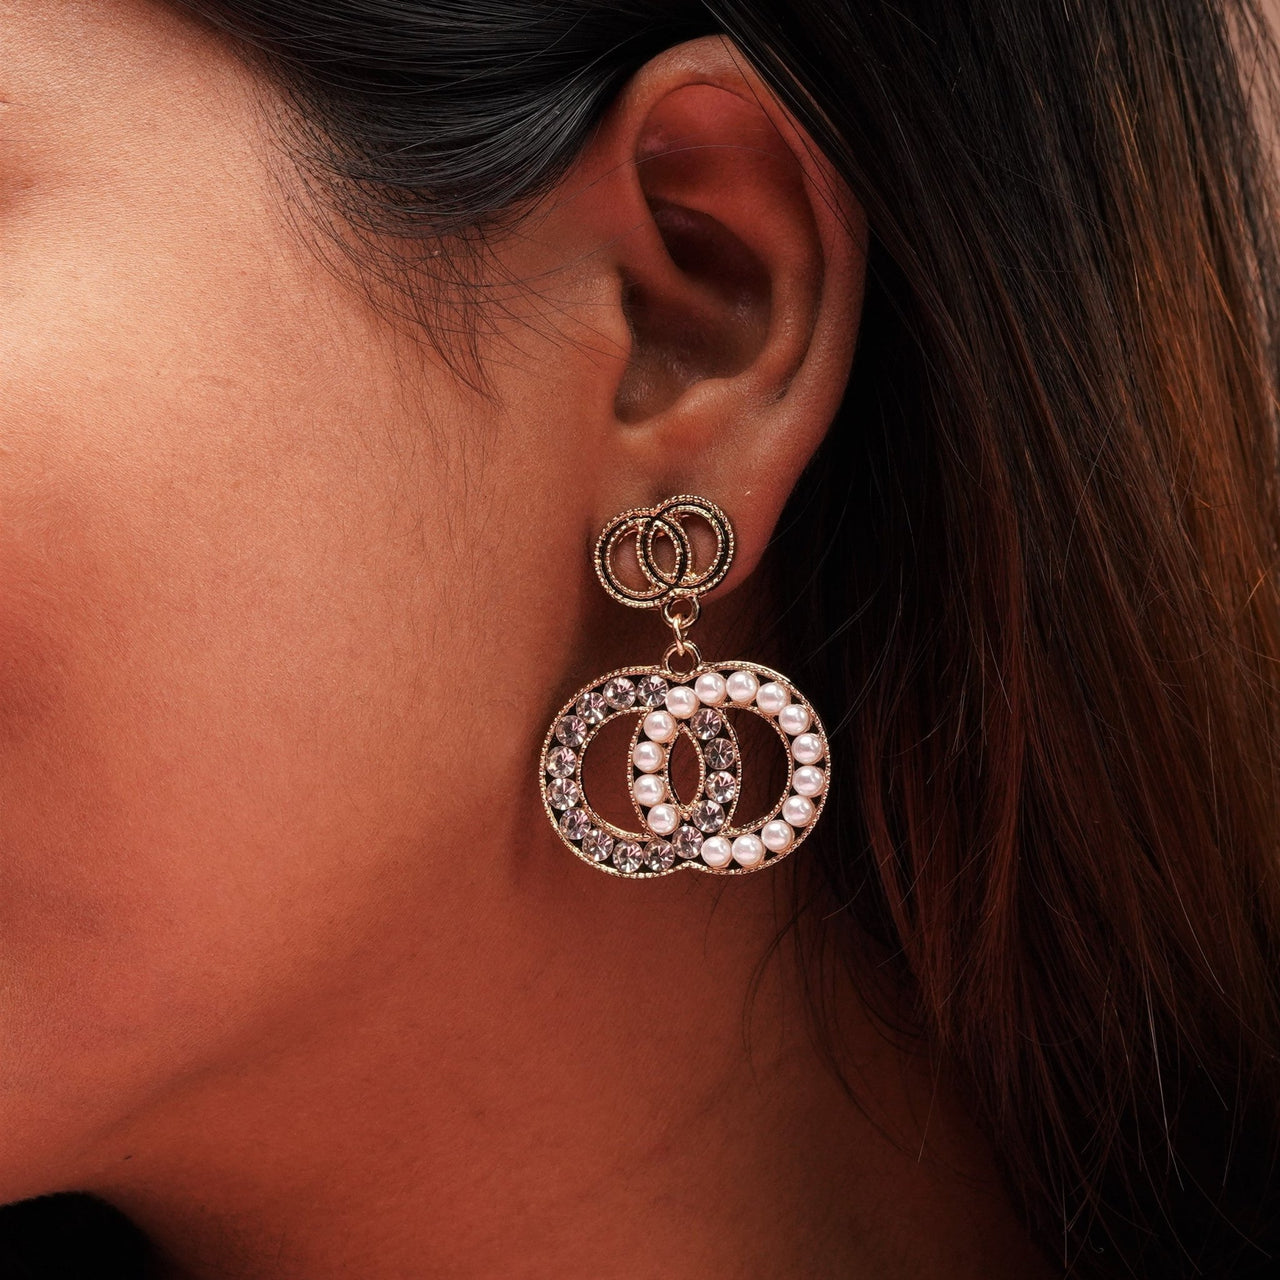 A round Shape earring with pearl and stone